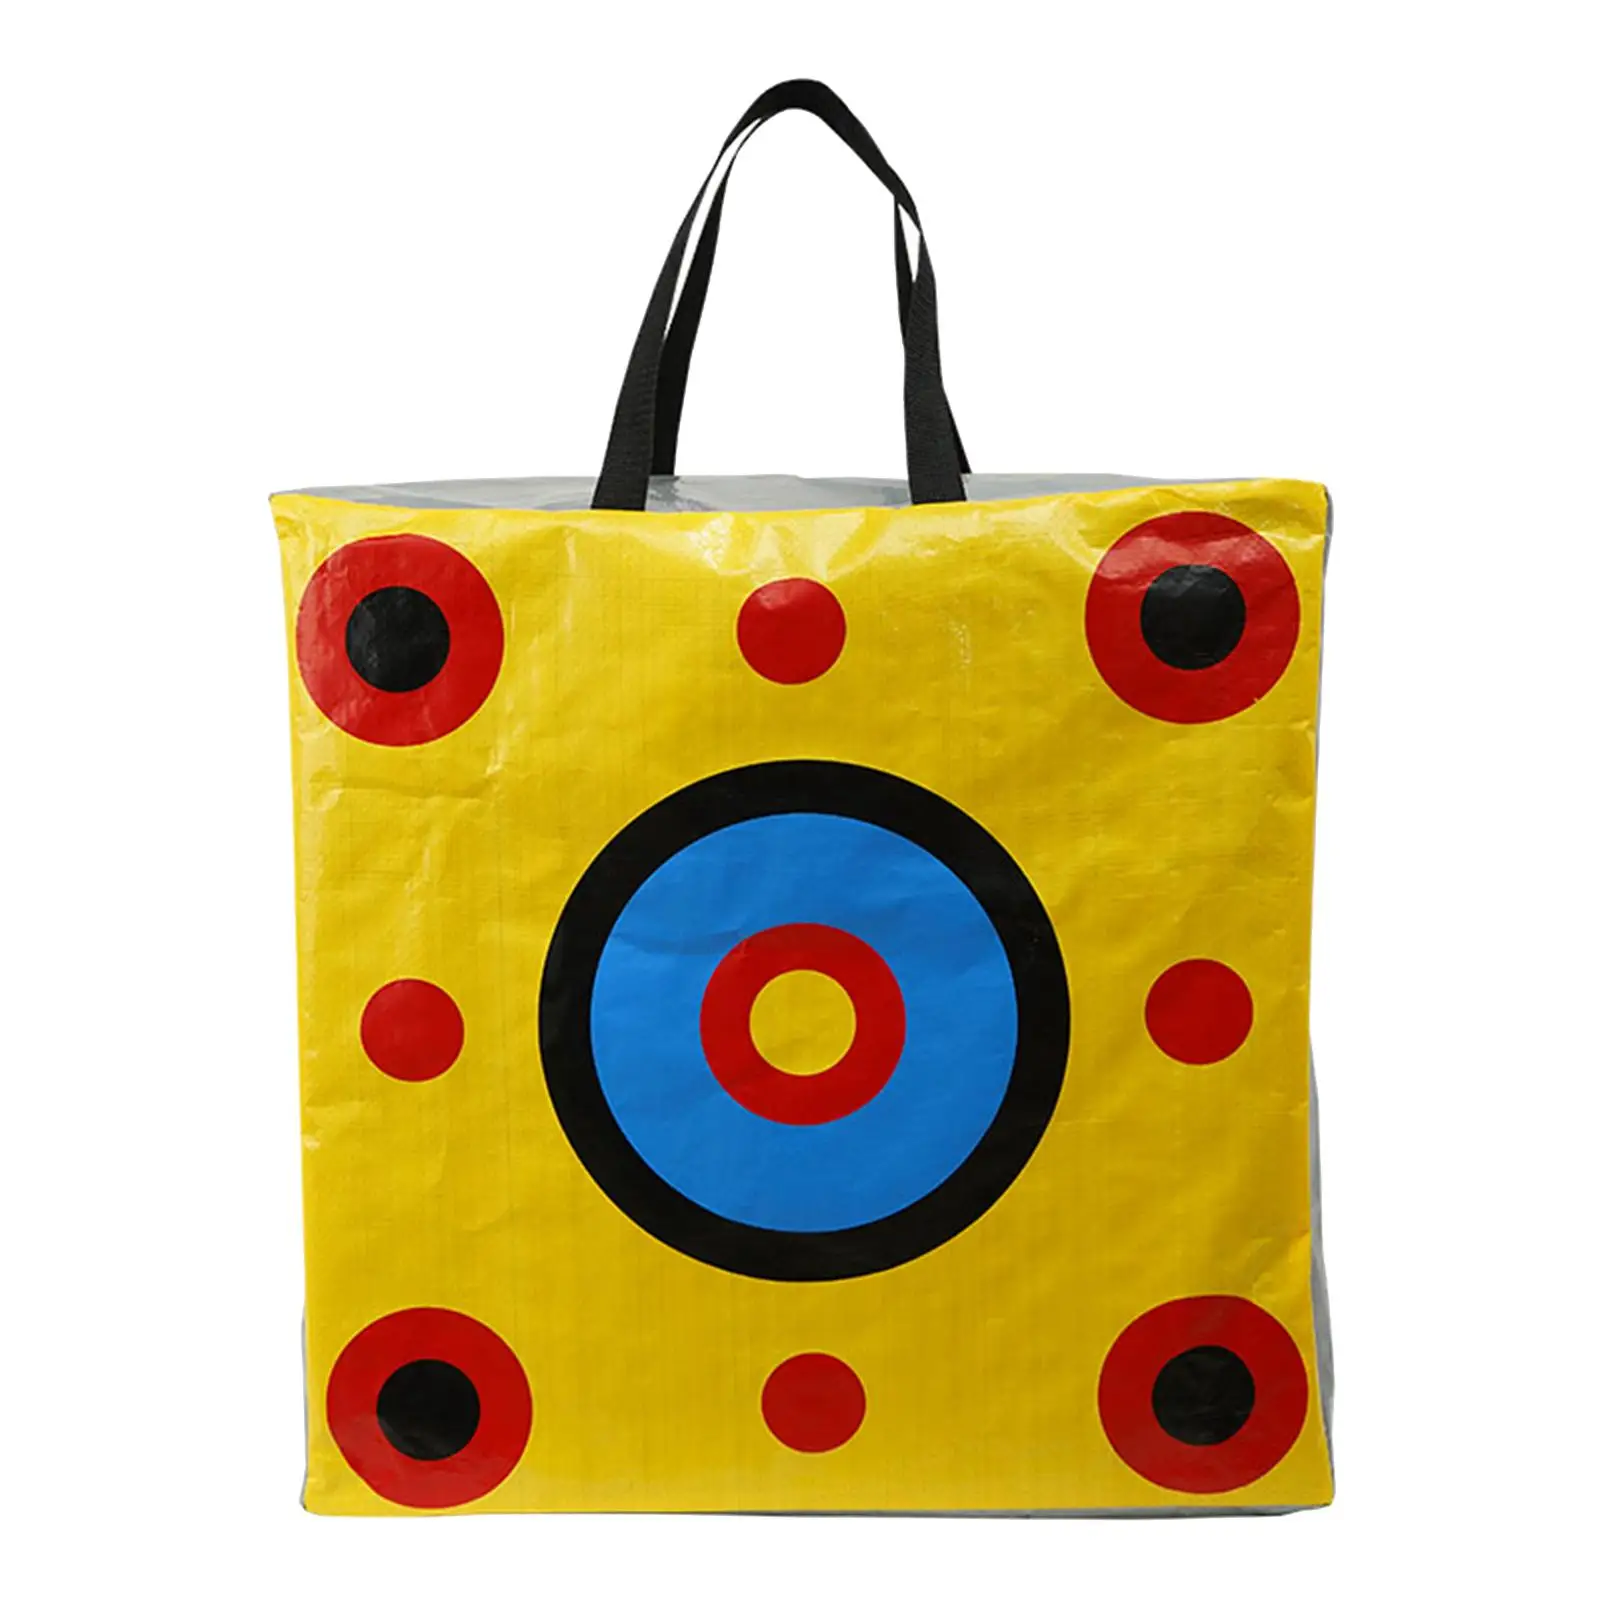 Field Point Bag Archery Target Lightweight Sports Practice Shooting Targets